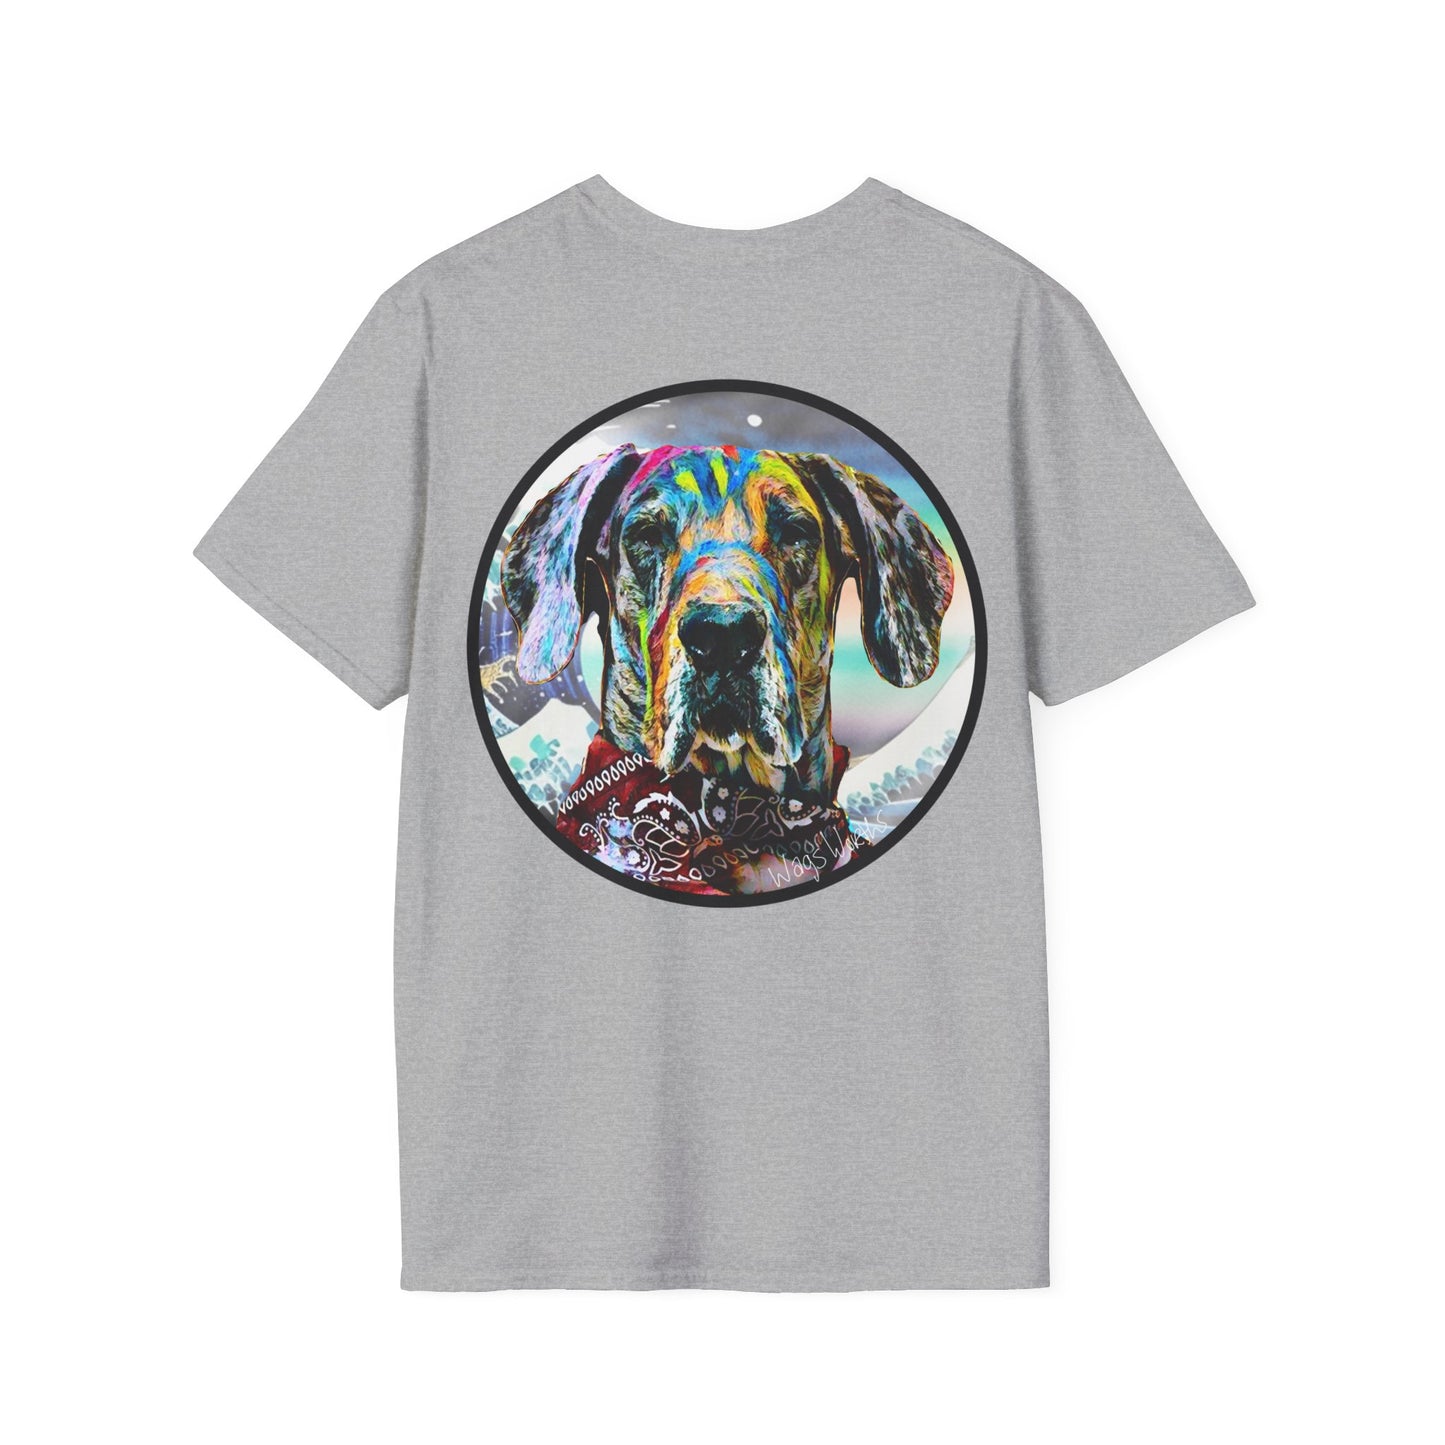 Mongo in Oil Graphic Tee